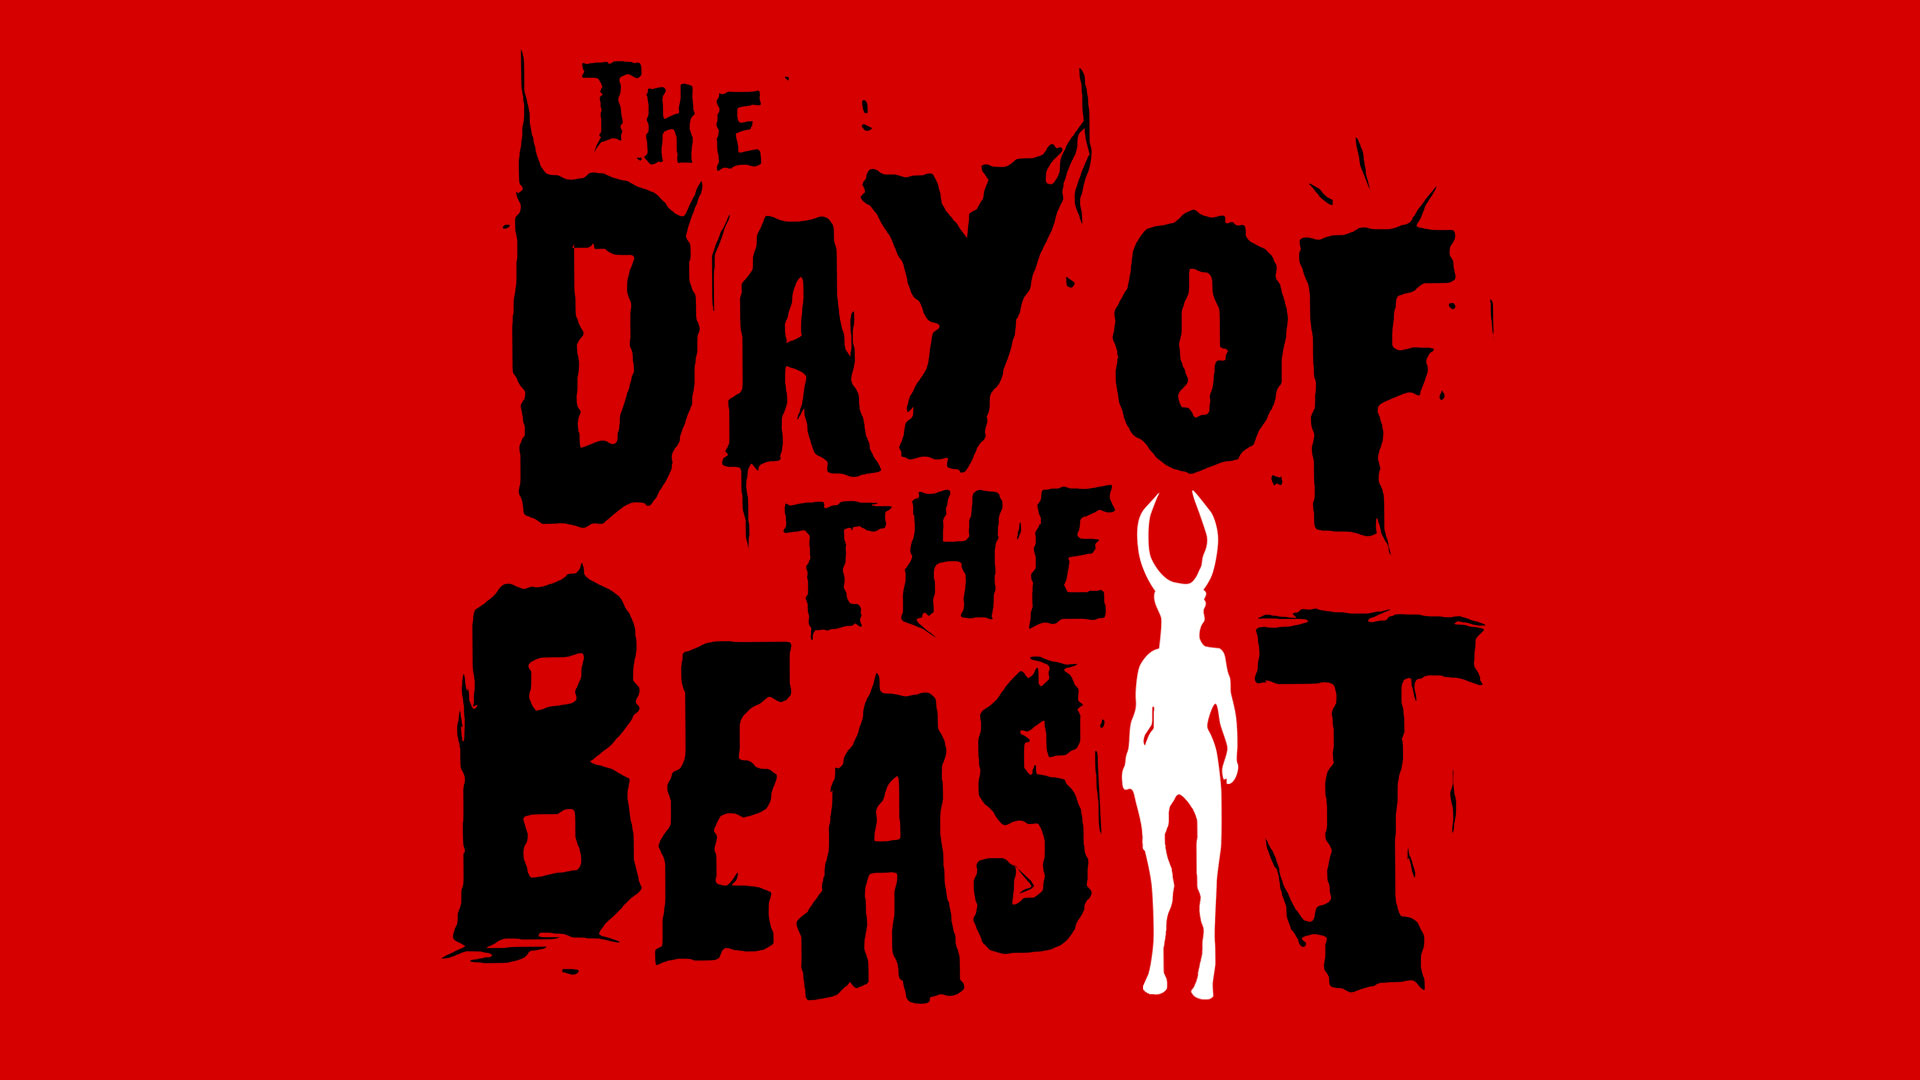 The Day Of The Beast Full Movie | Official Trailer | FlixHouse